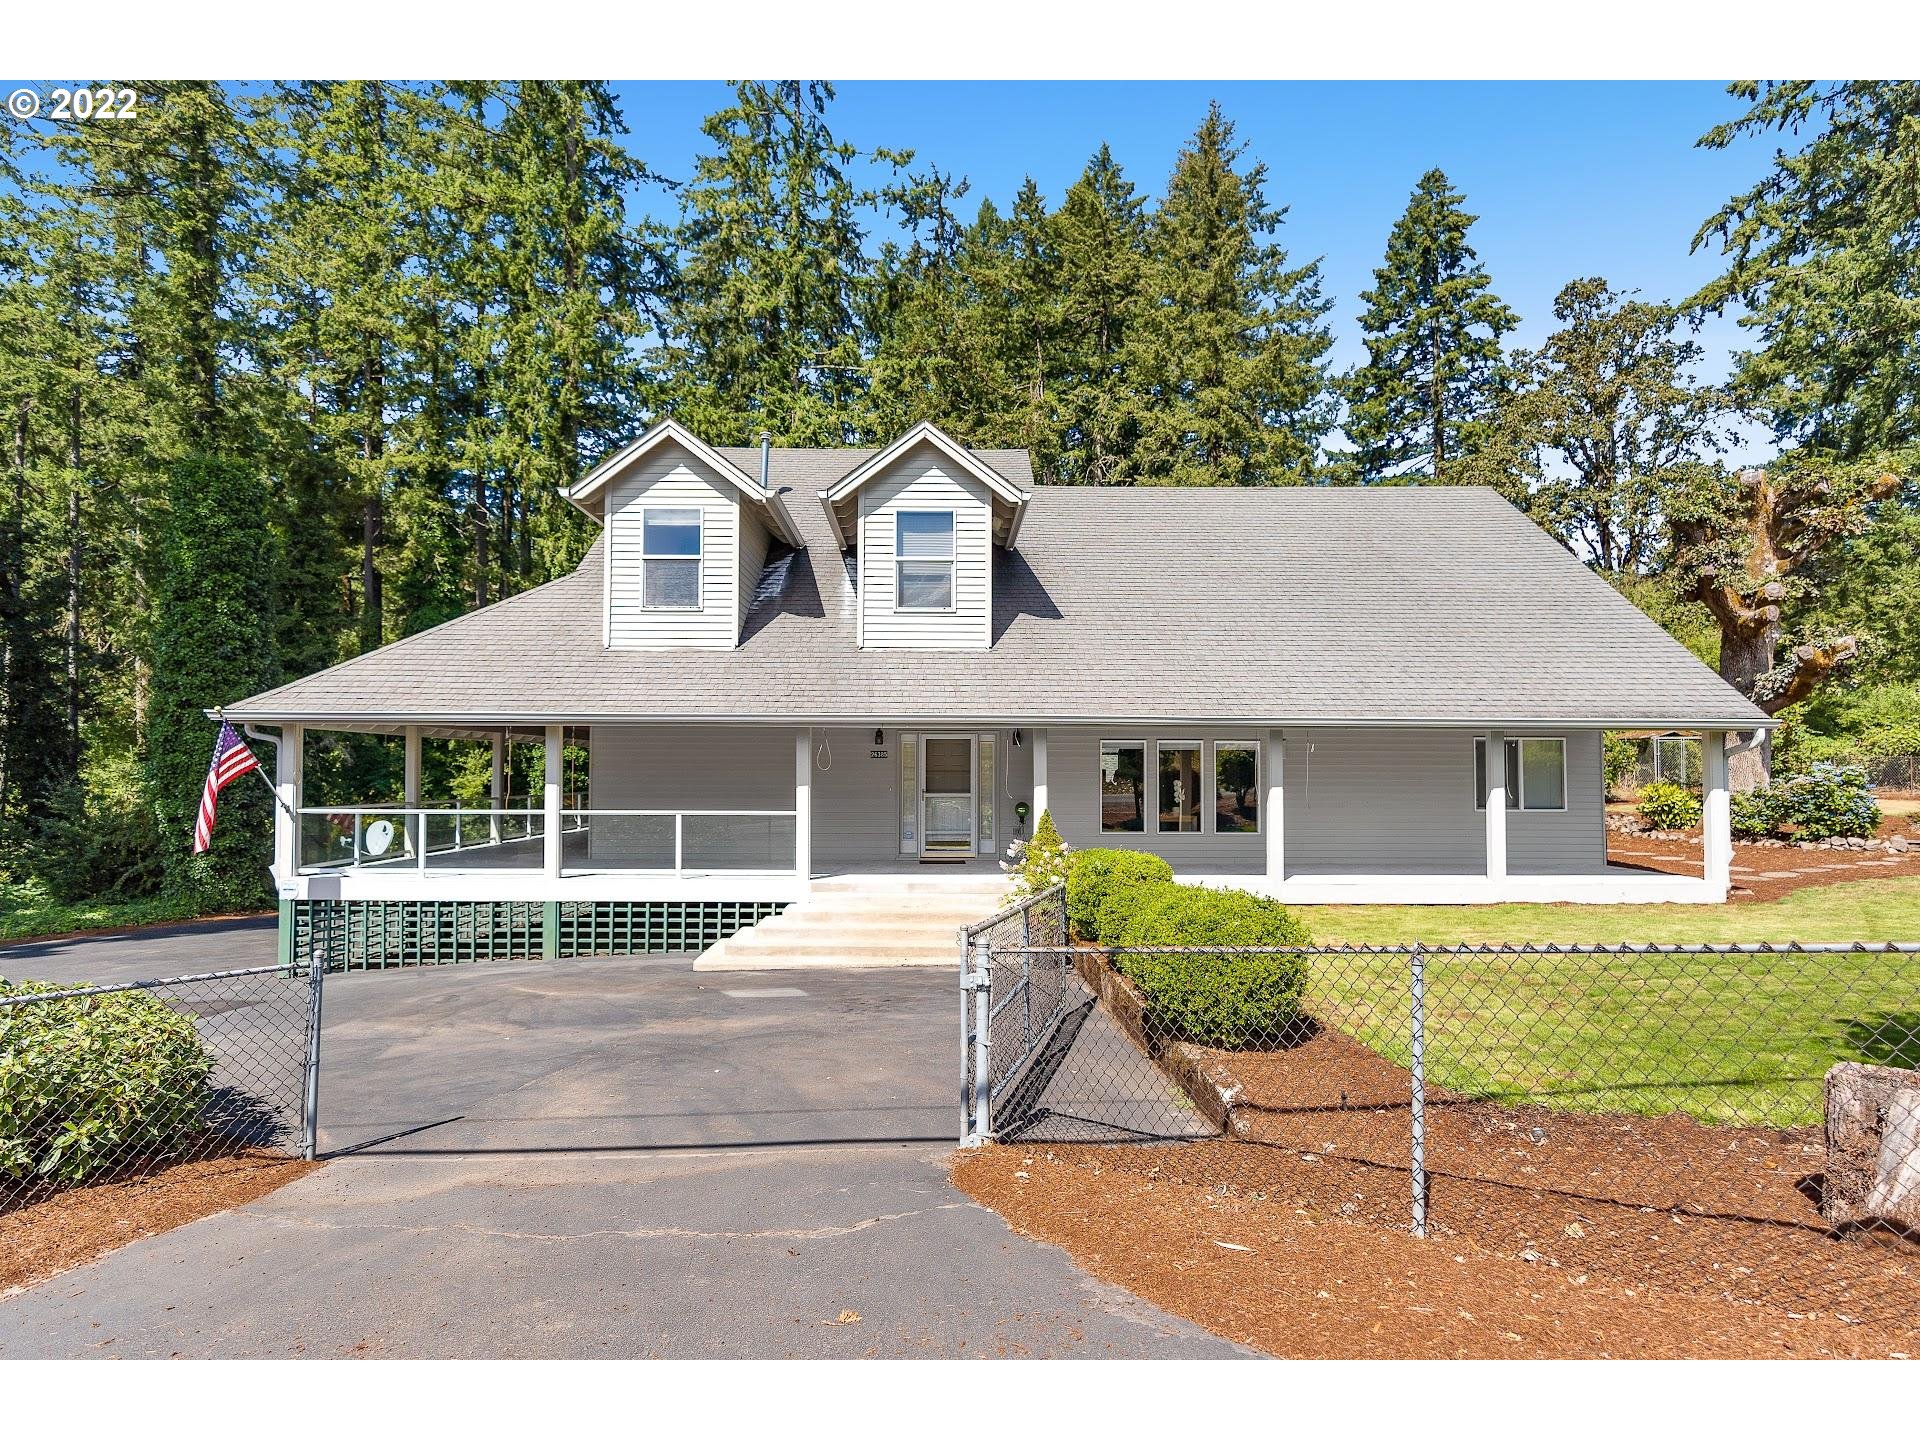 26385 SW PETES MOUNTAIN RD, West Linn, OR 97068